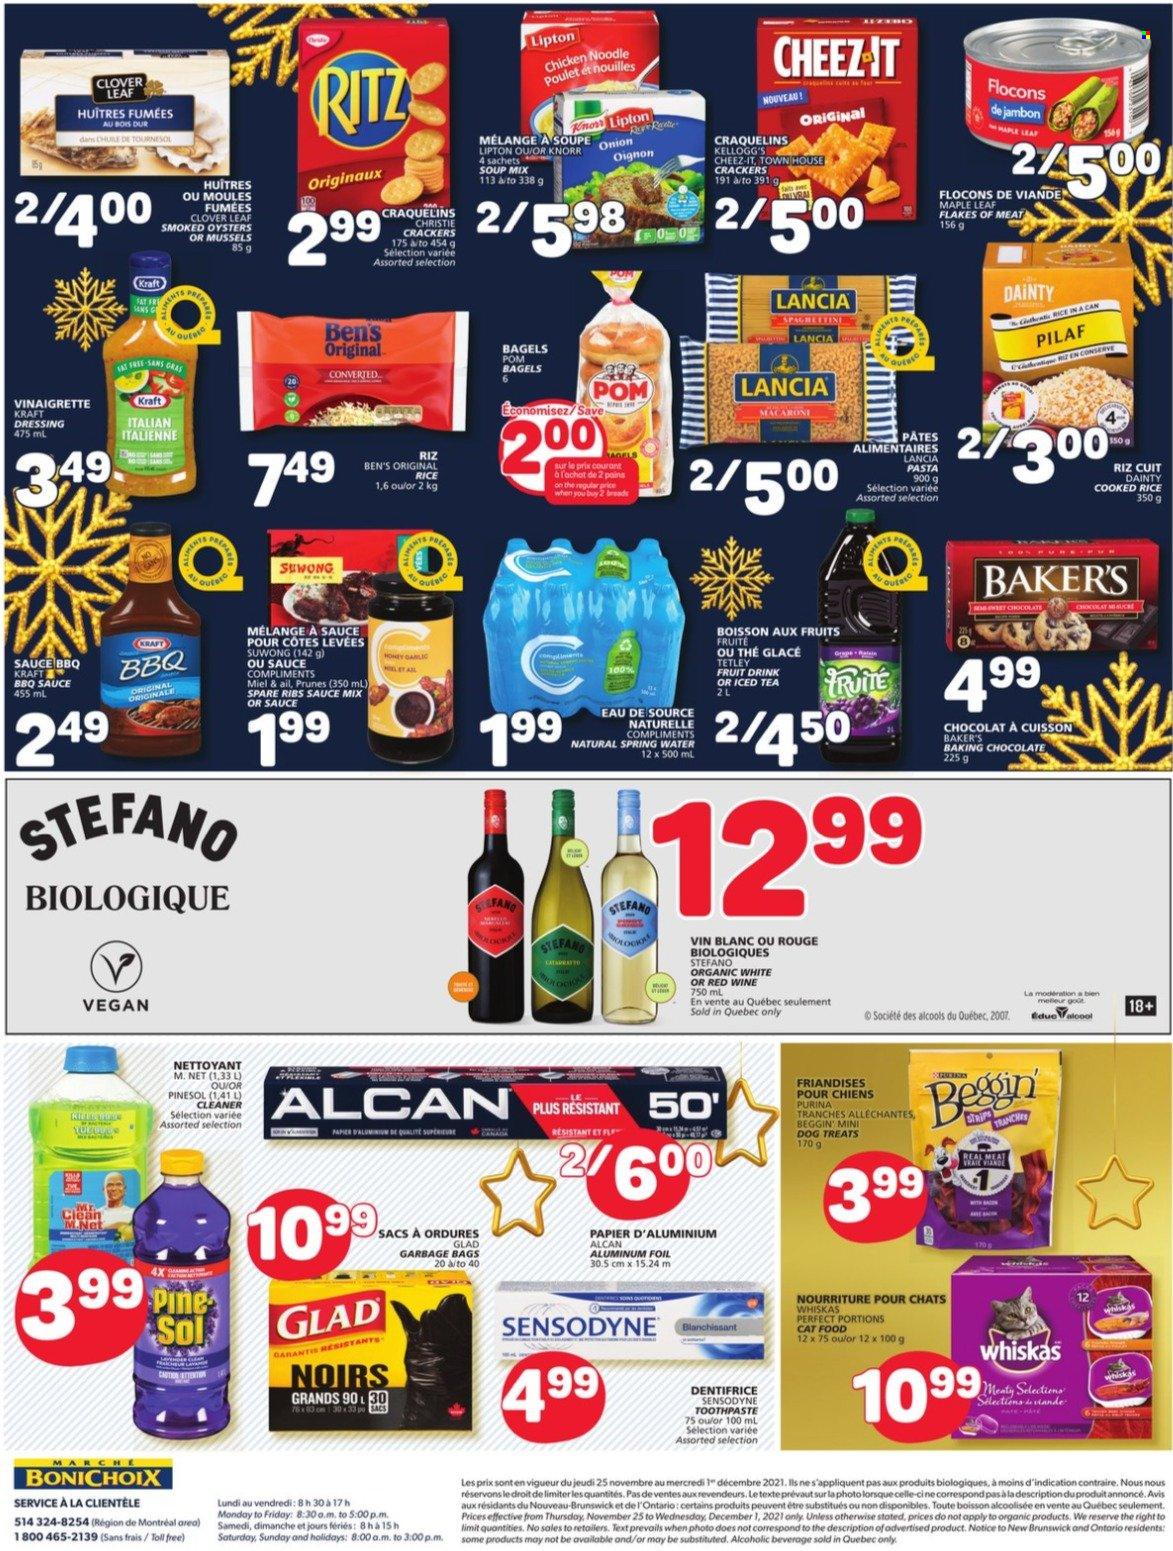 thumbnail - Marché Bonichoix Flyer - November 25, 2021 - December 01, 2021 - Sales products - bagels, mussels, smoked oysters, oysters, soup mix, soup, pasta, noodles, Kraft®, Clover, chocolate, crackers, Kellogg's, RITZ, Cheez-It, rice, BBQ sauce, vinaigrette dressing, dressing, fruit drink, ice tea, spring water, pork spare ribs, cleaner, Pine-Sol, toothpaste, Knorr, Sensodyne, Lipton, Whiskas. Page 7.